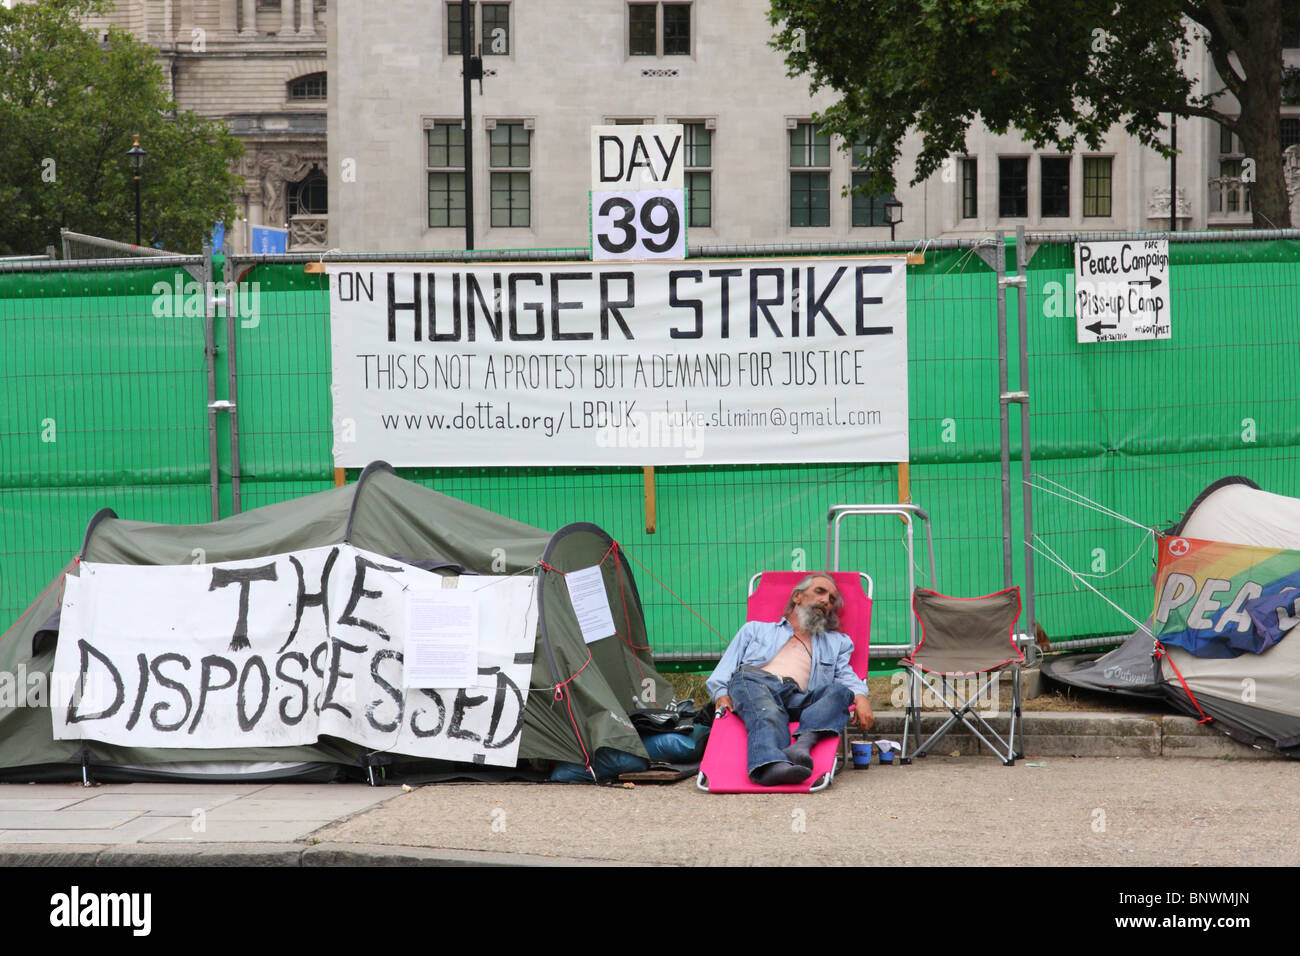 A protester on hunger strike at the peace camp, Parliament Square, Westminster, London, England, U.K. Stock Photo